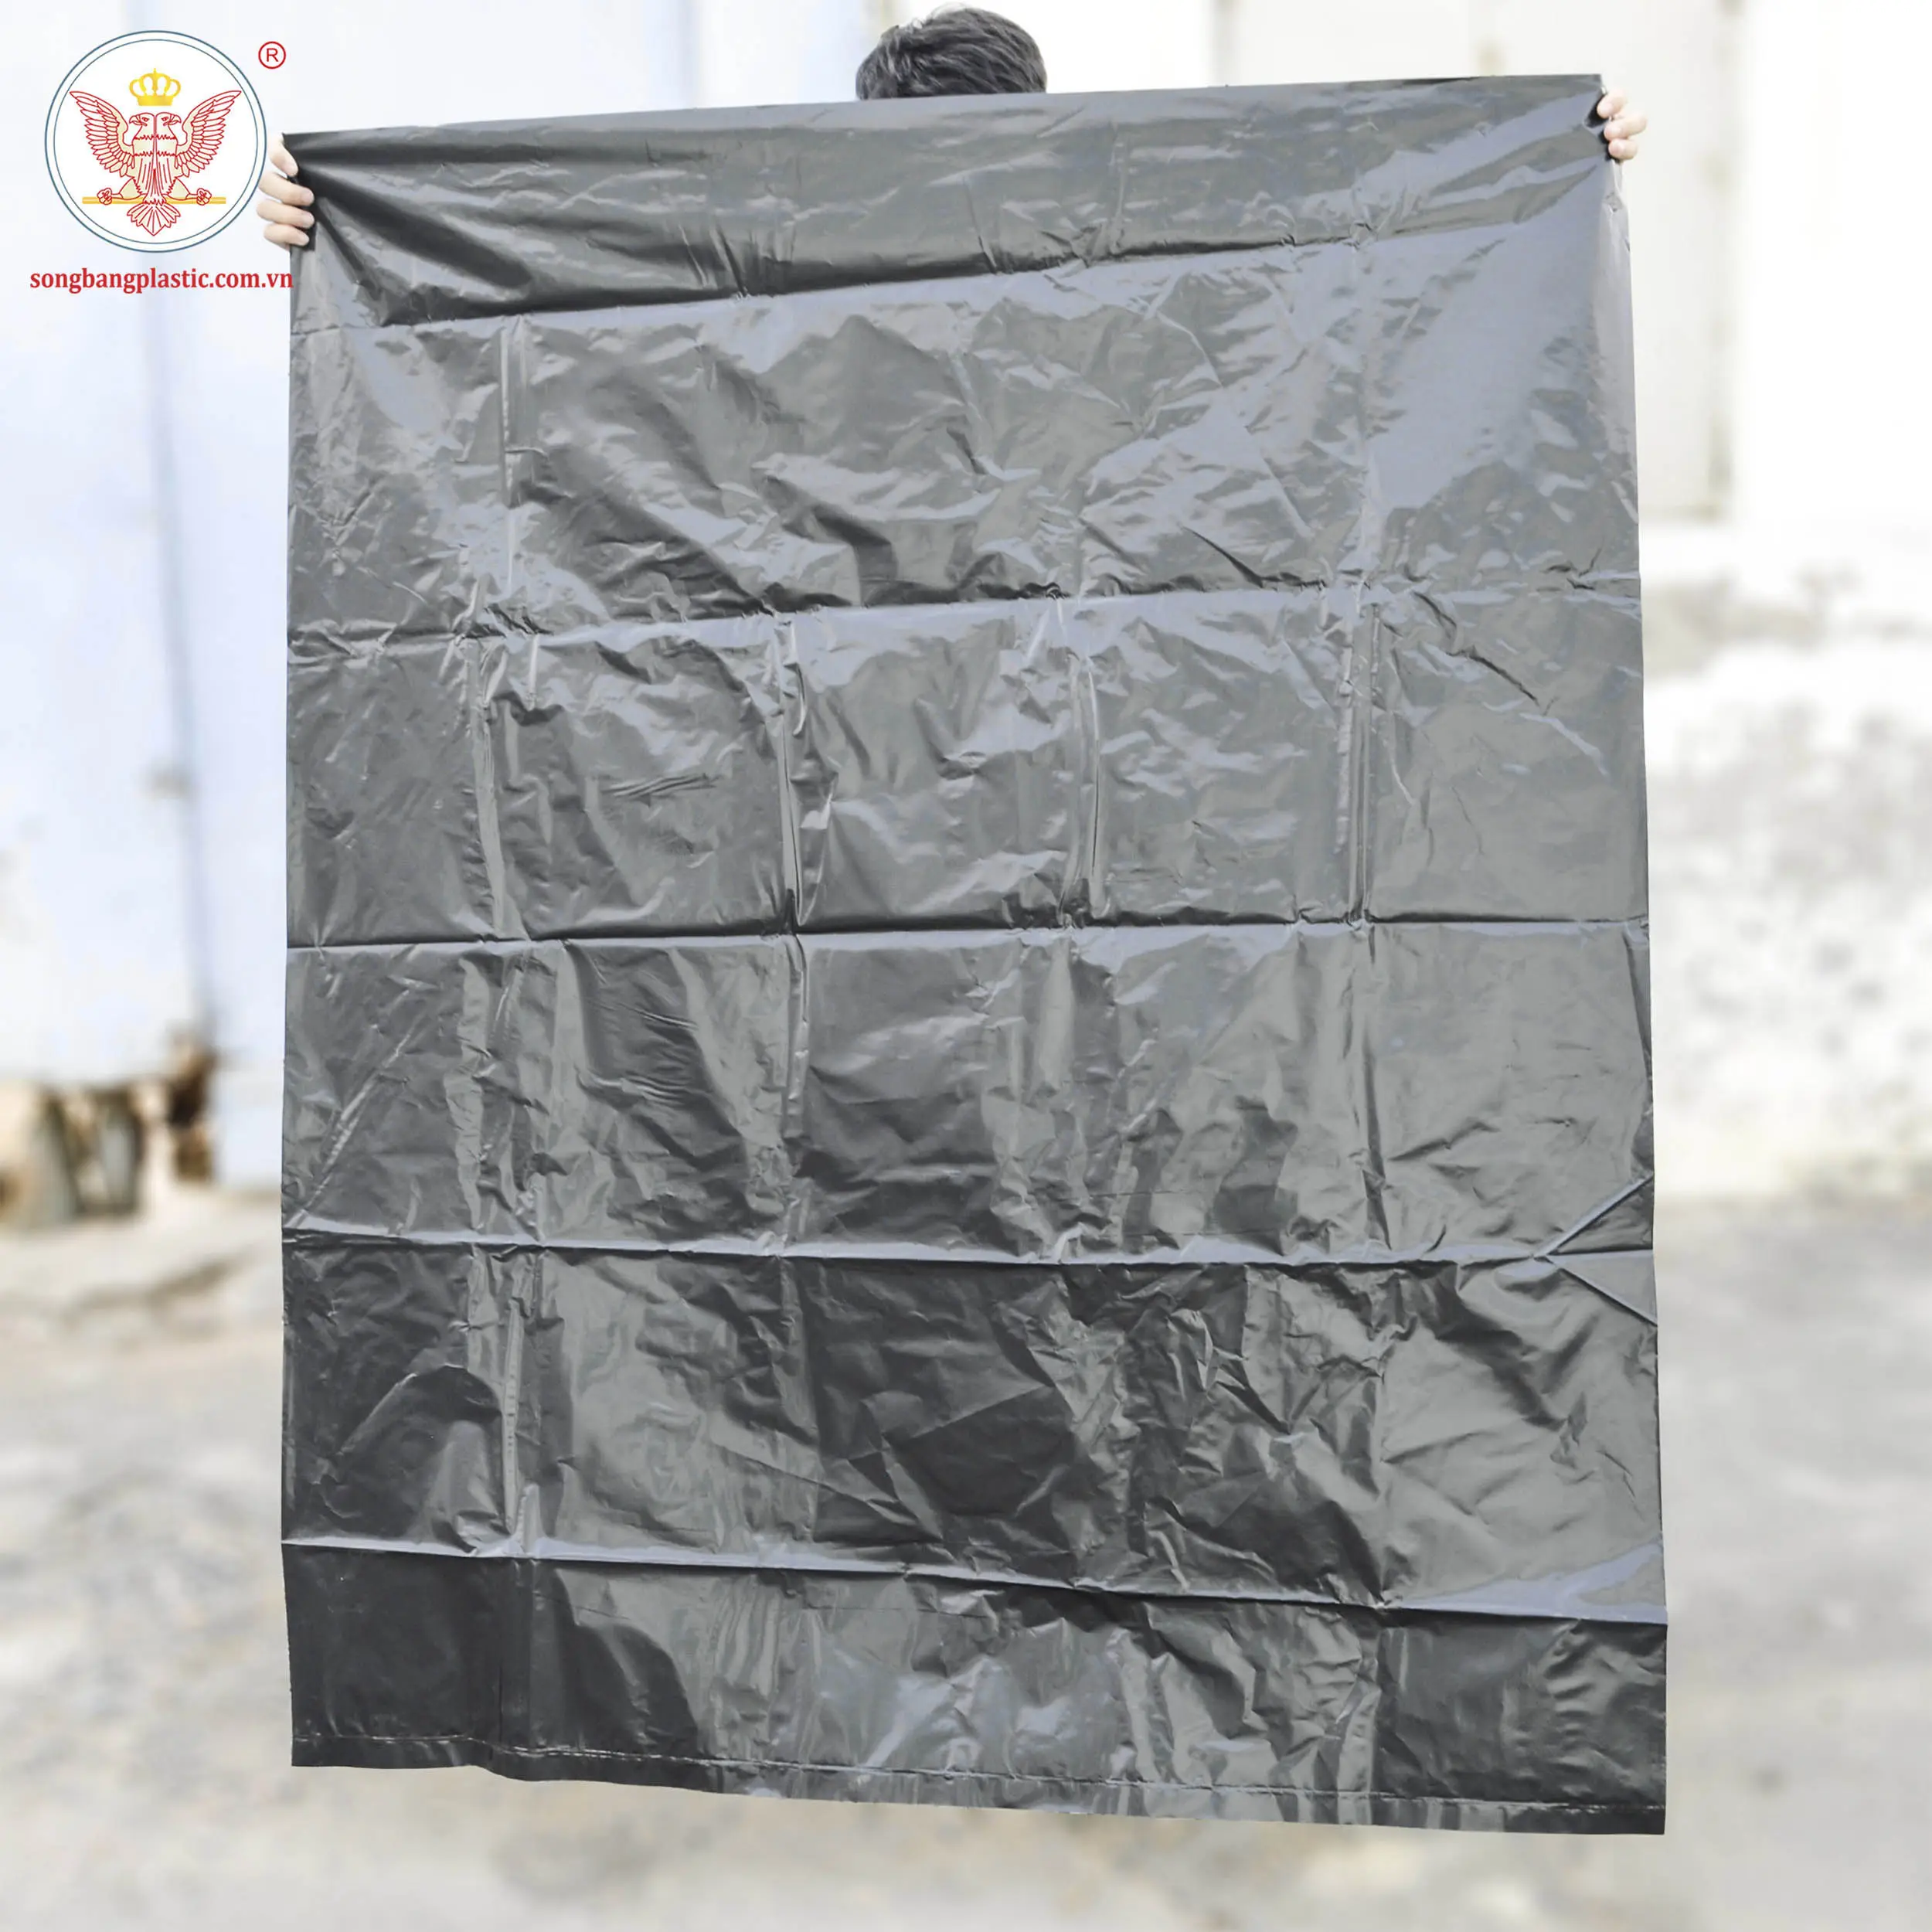 Black ldpe hdpe plastic bin industrial garbage bags direct from factory | Industrial garbage bags with cheap price for export